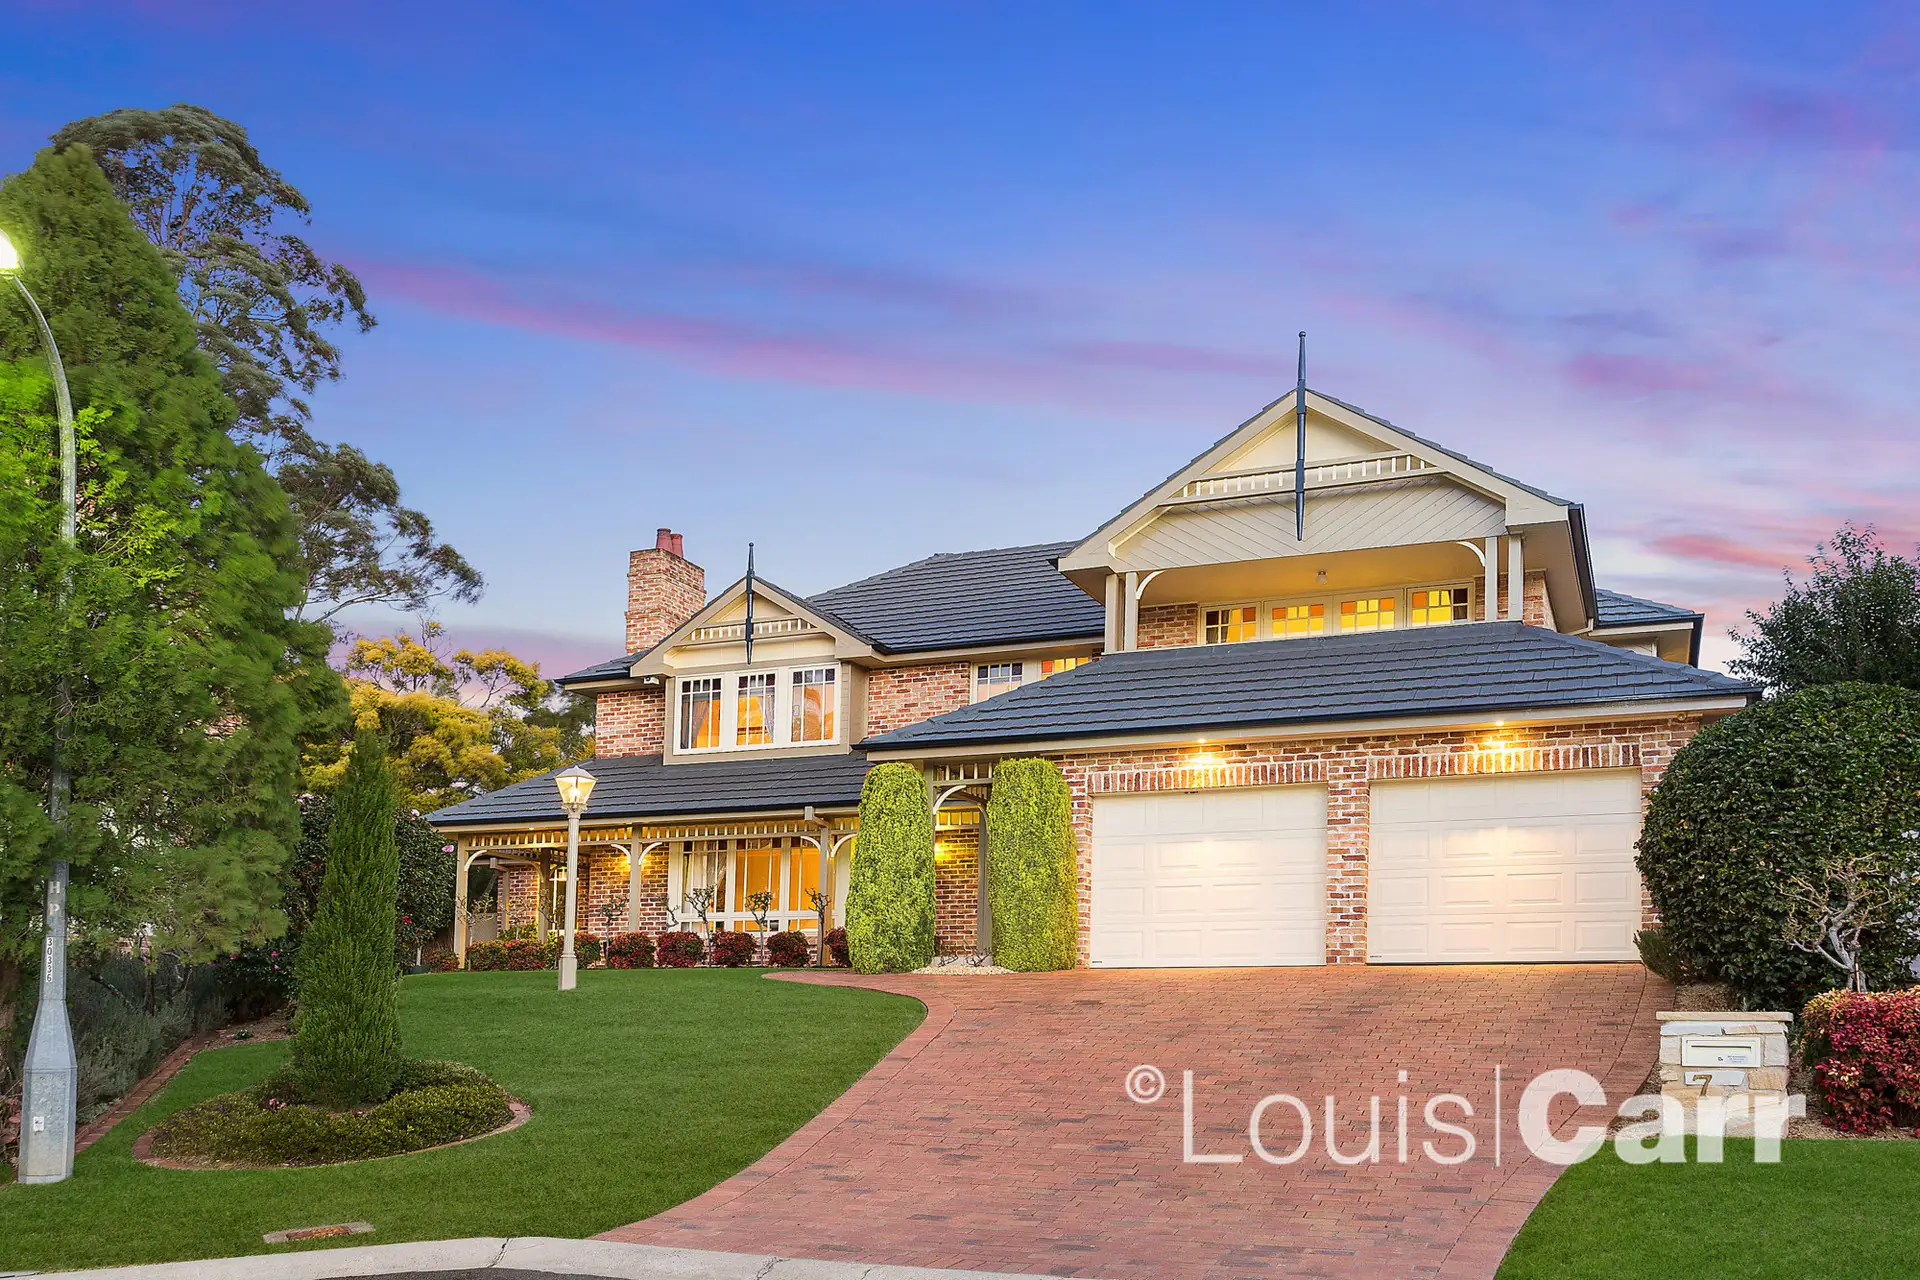 Photo #1: 7 Rosella Way, West Pennant Hills - Sold by Louis Carr Real Estate